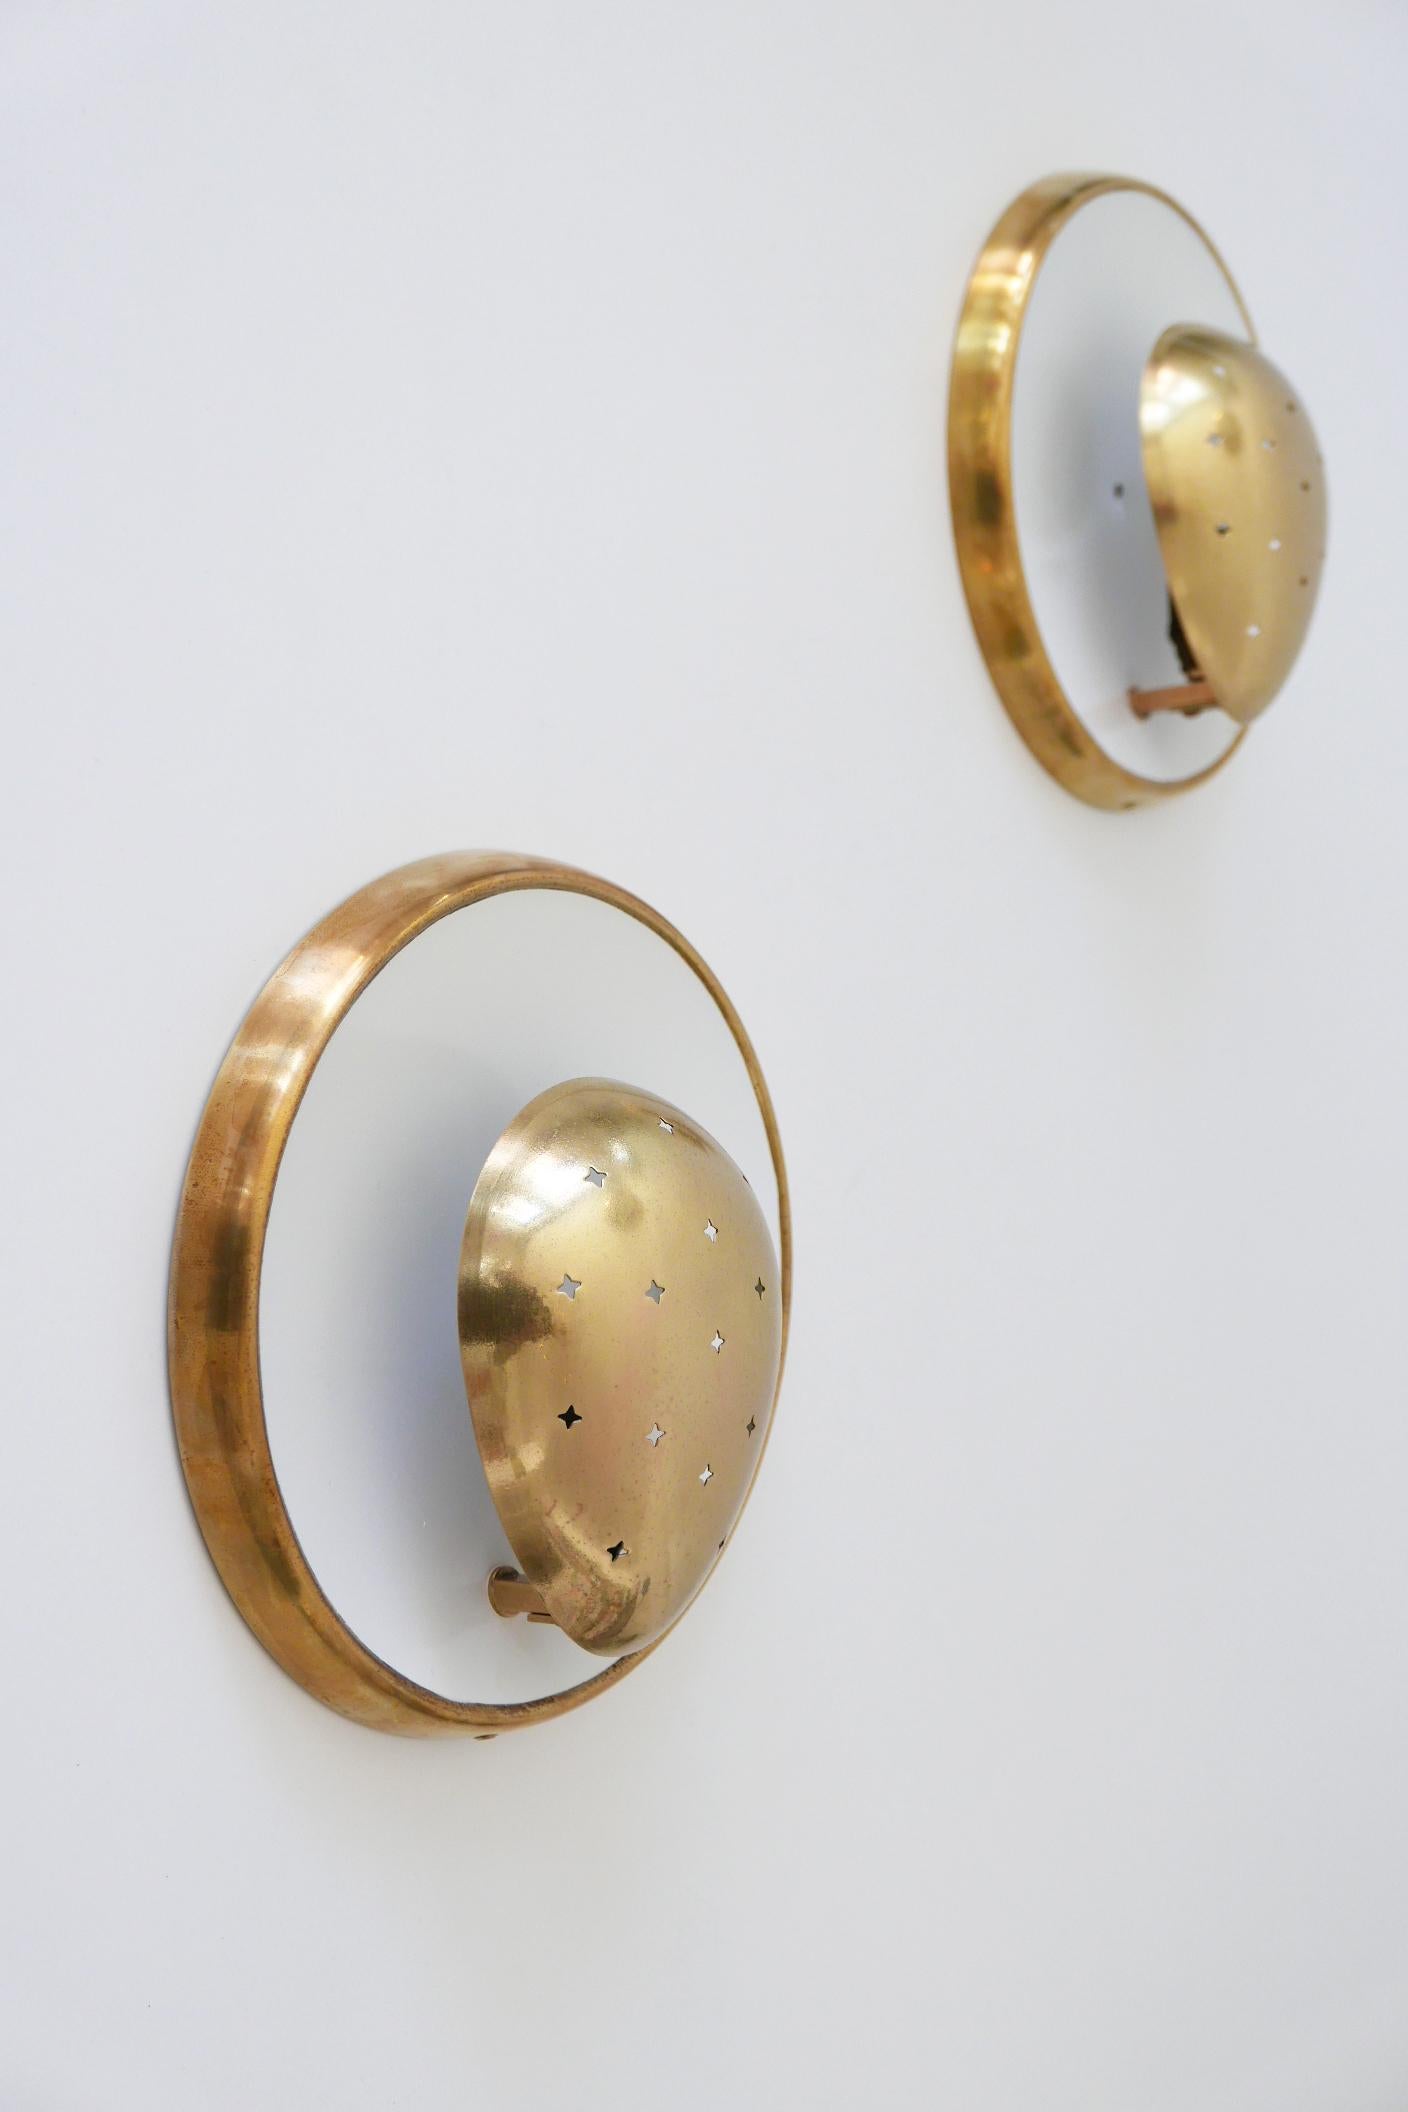 Mid-20th Century Set of Two Mid-Century Modern Sputnik Brass Wall Lamps or Sconces, 1950s, France